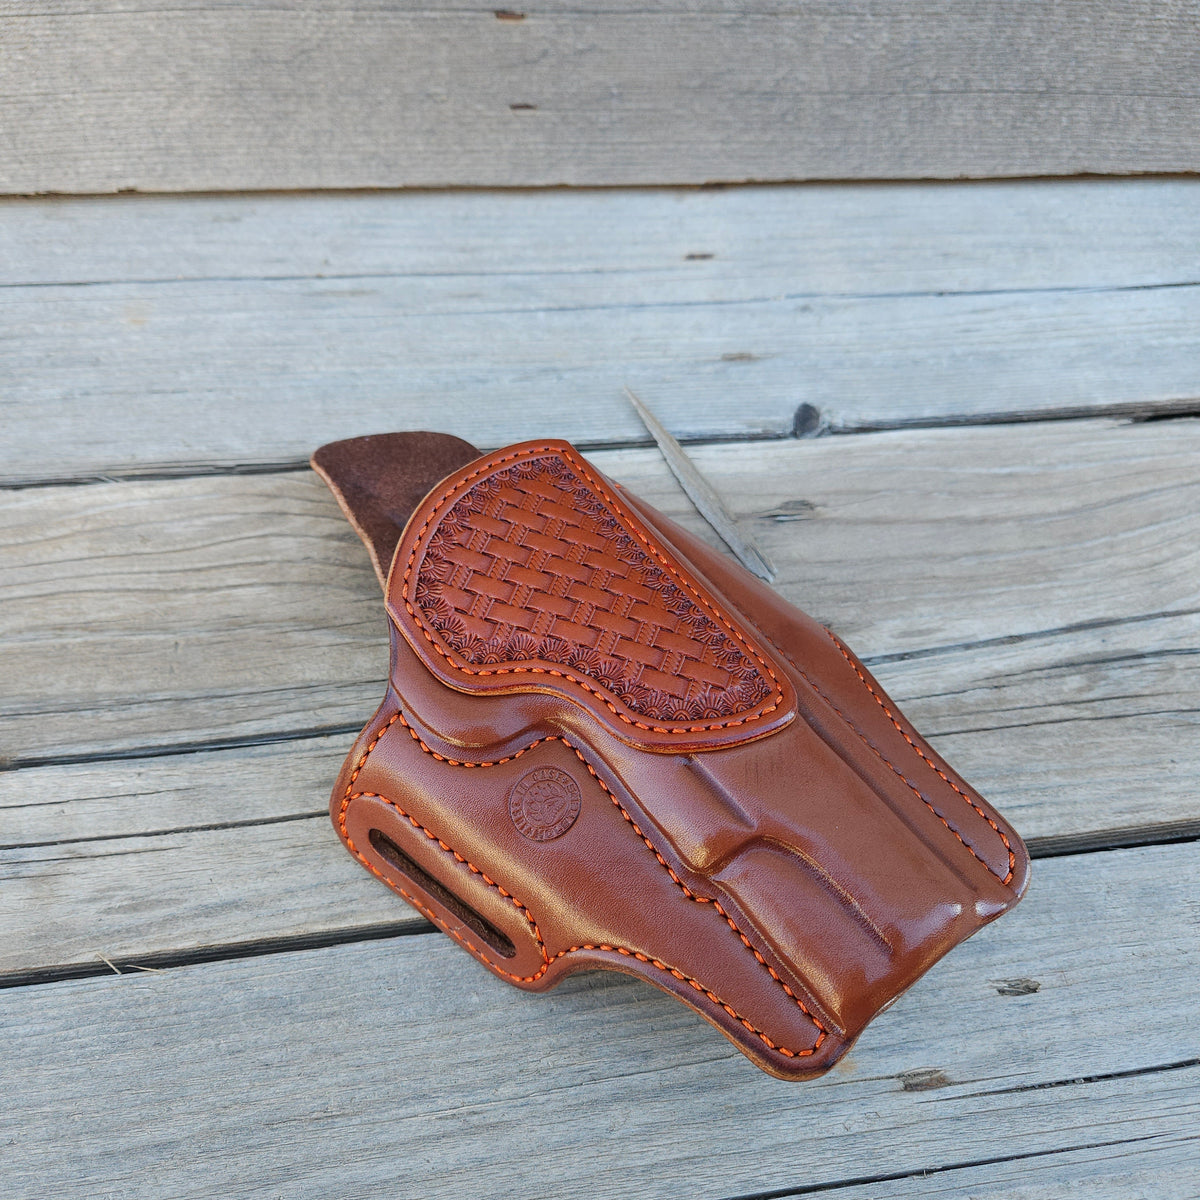 5" 1911 Classic Holster Brn/Ches Burnt Orange Stitching and basket stamp